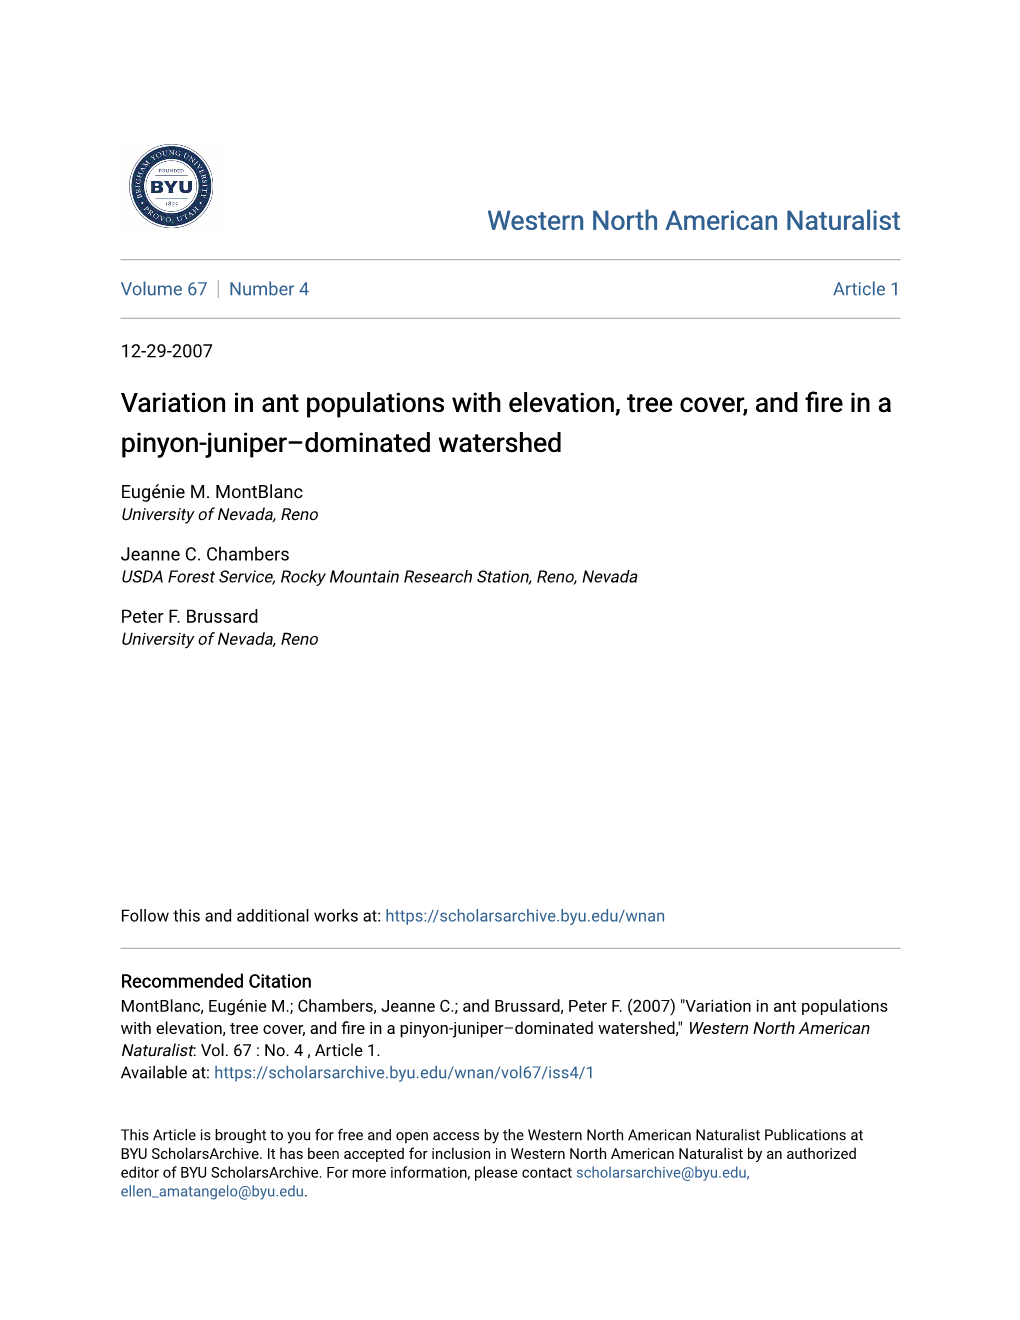 Variation in Ant Populations with Elevation, Tree Cover, and Fire in a Pinyon-Juniper–Dominated Watershed